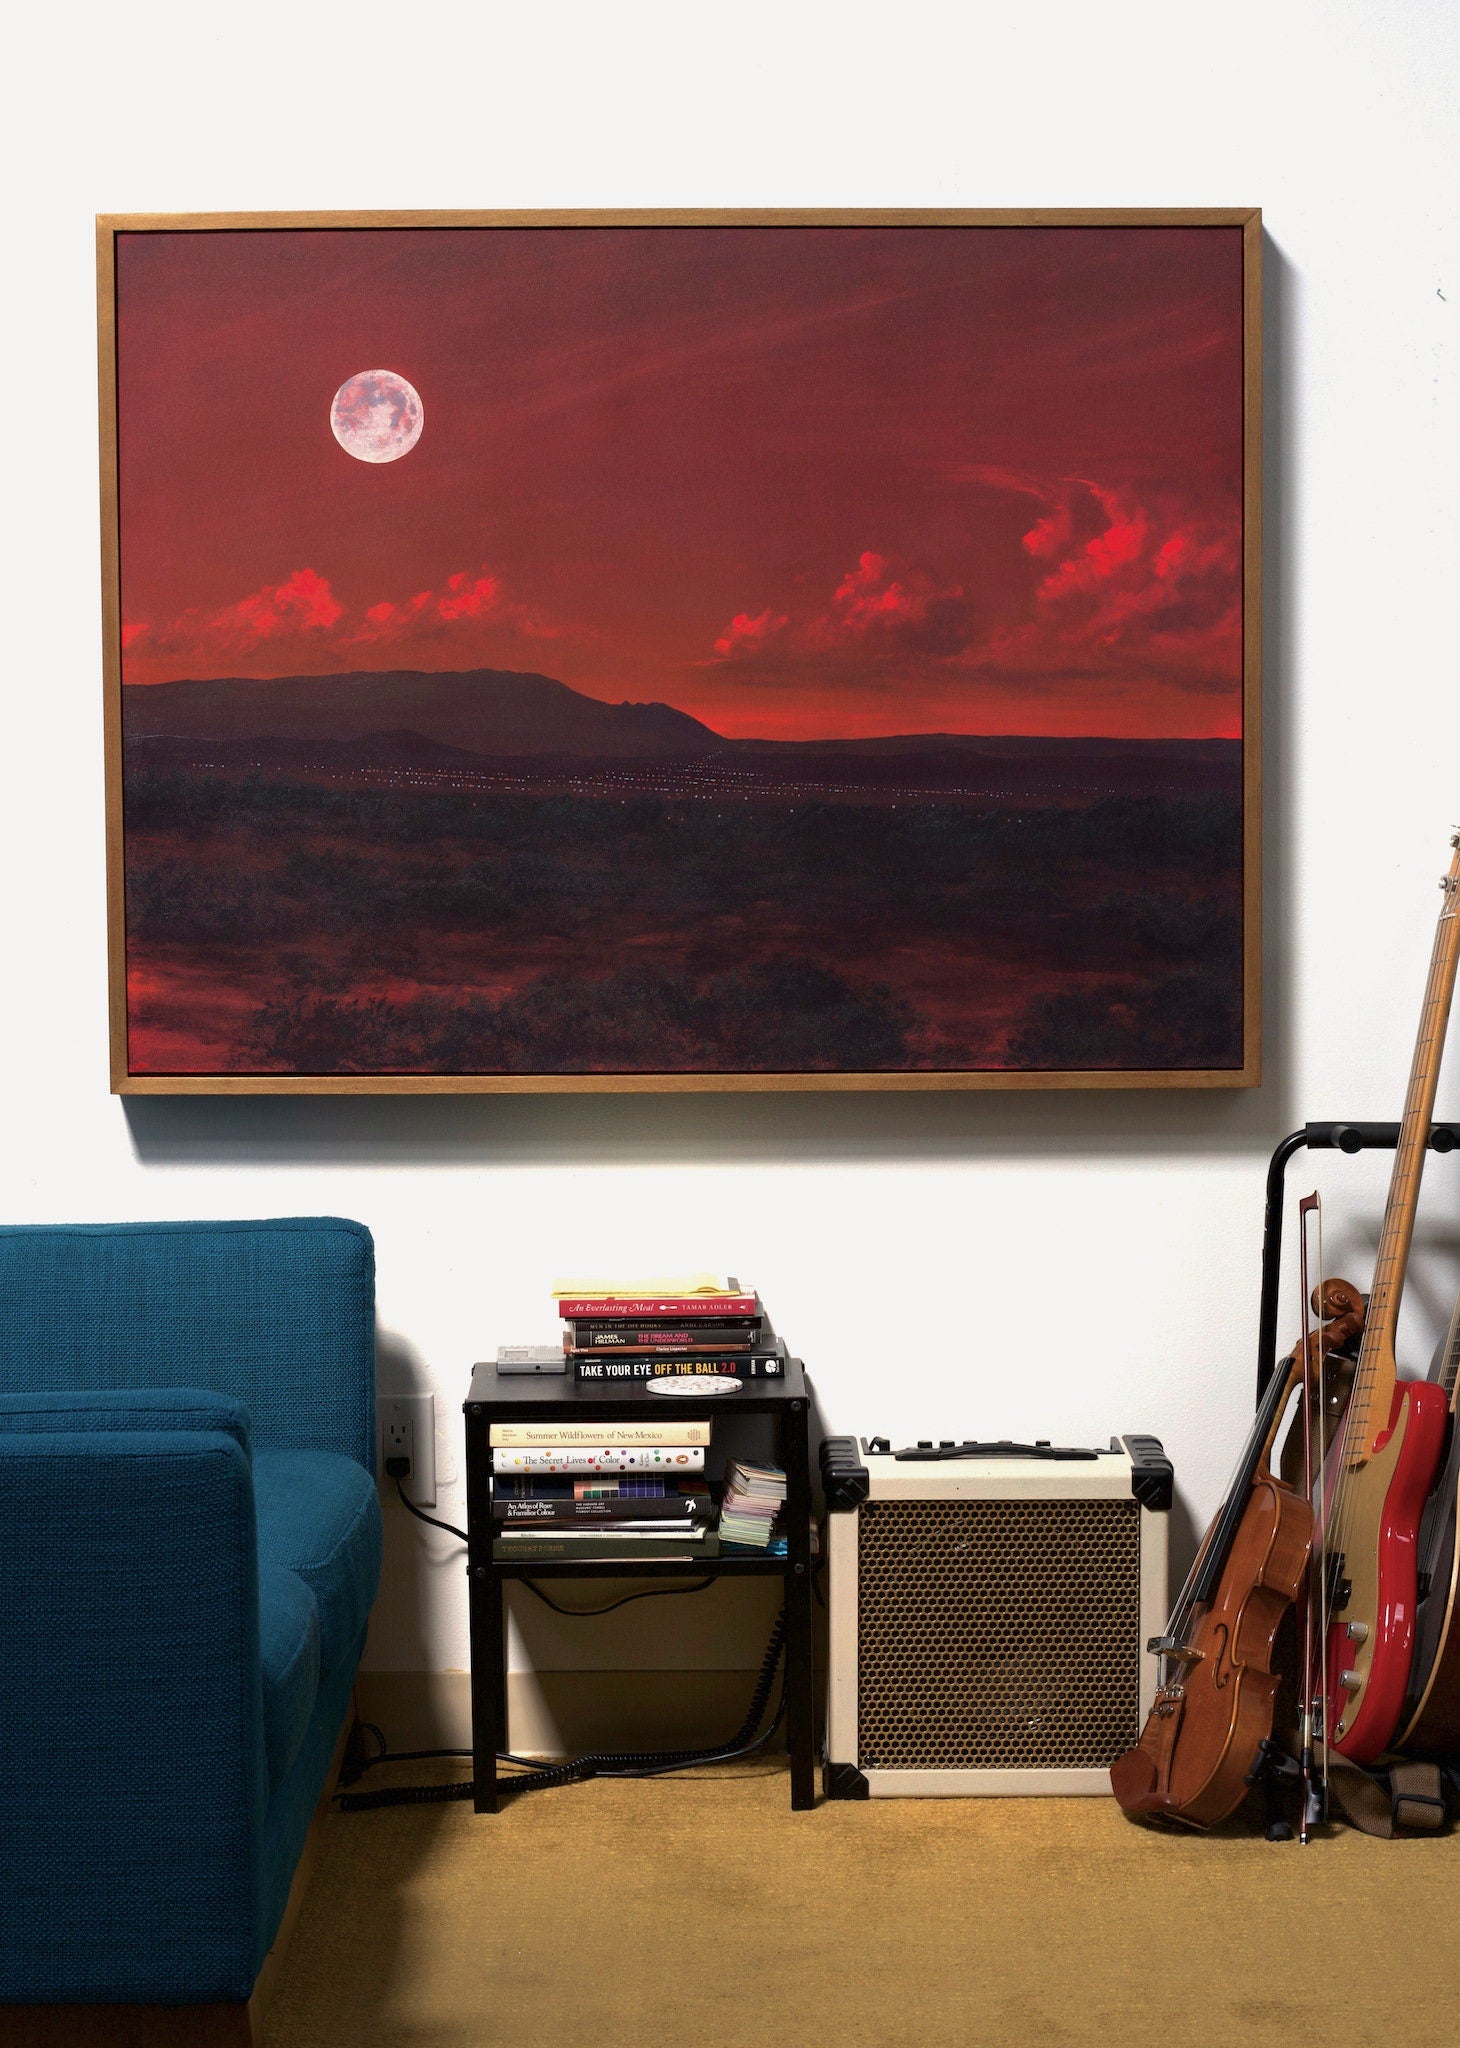 Santa Fe Night Series 3, No.4 - Original Southwest Landscape Oil Painting - 36 x 48 inches in handmade frame